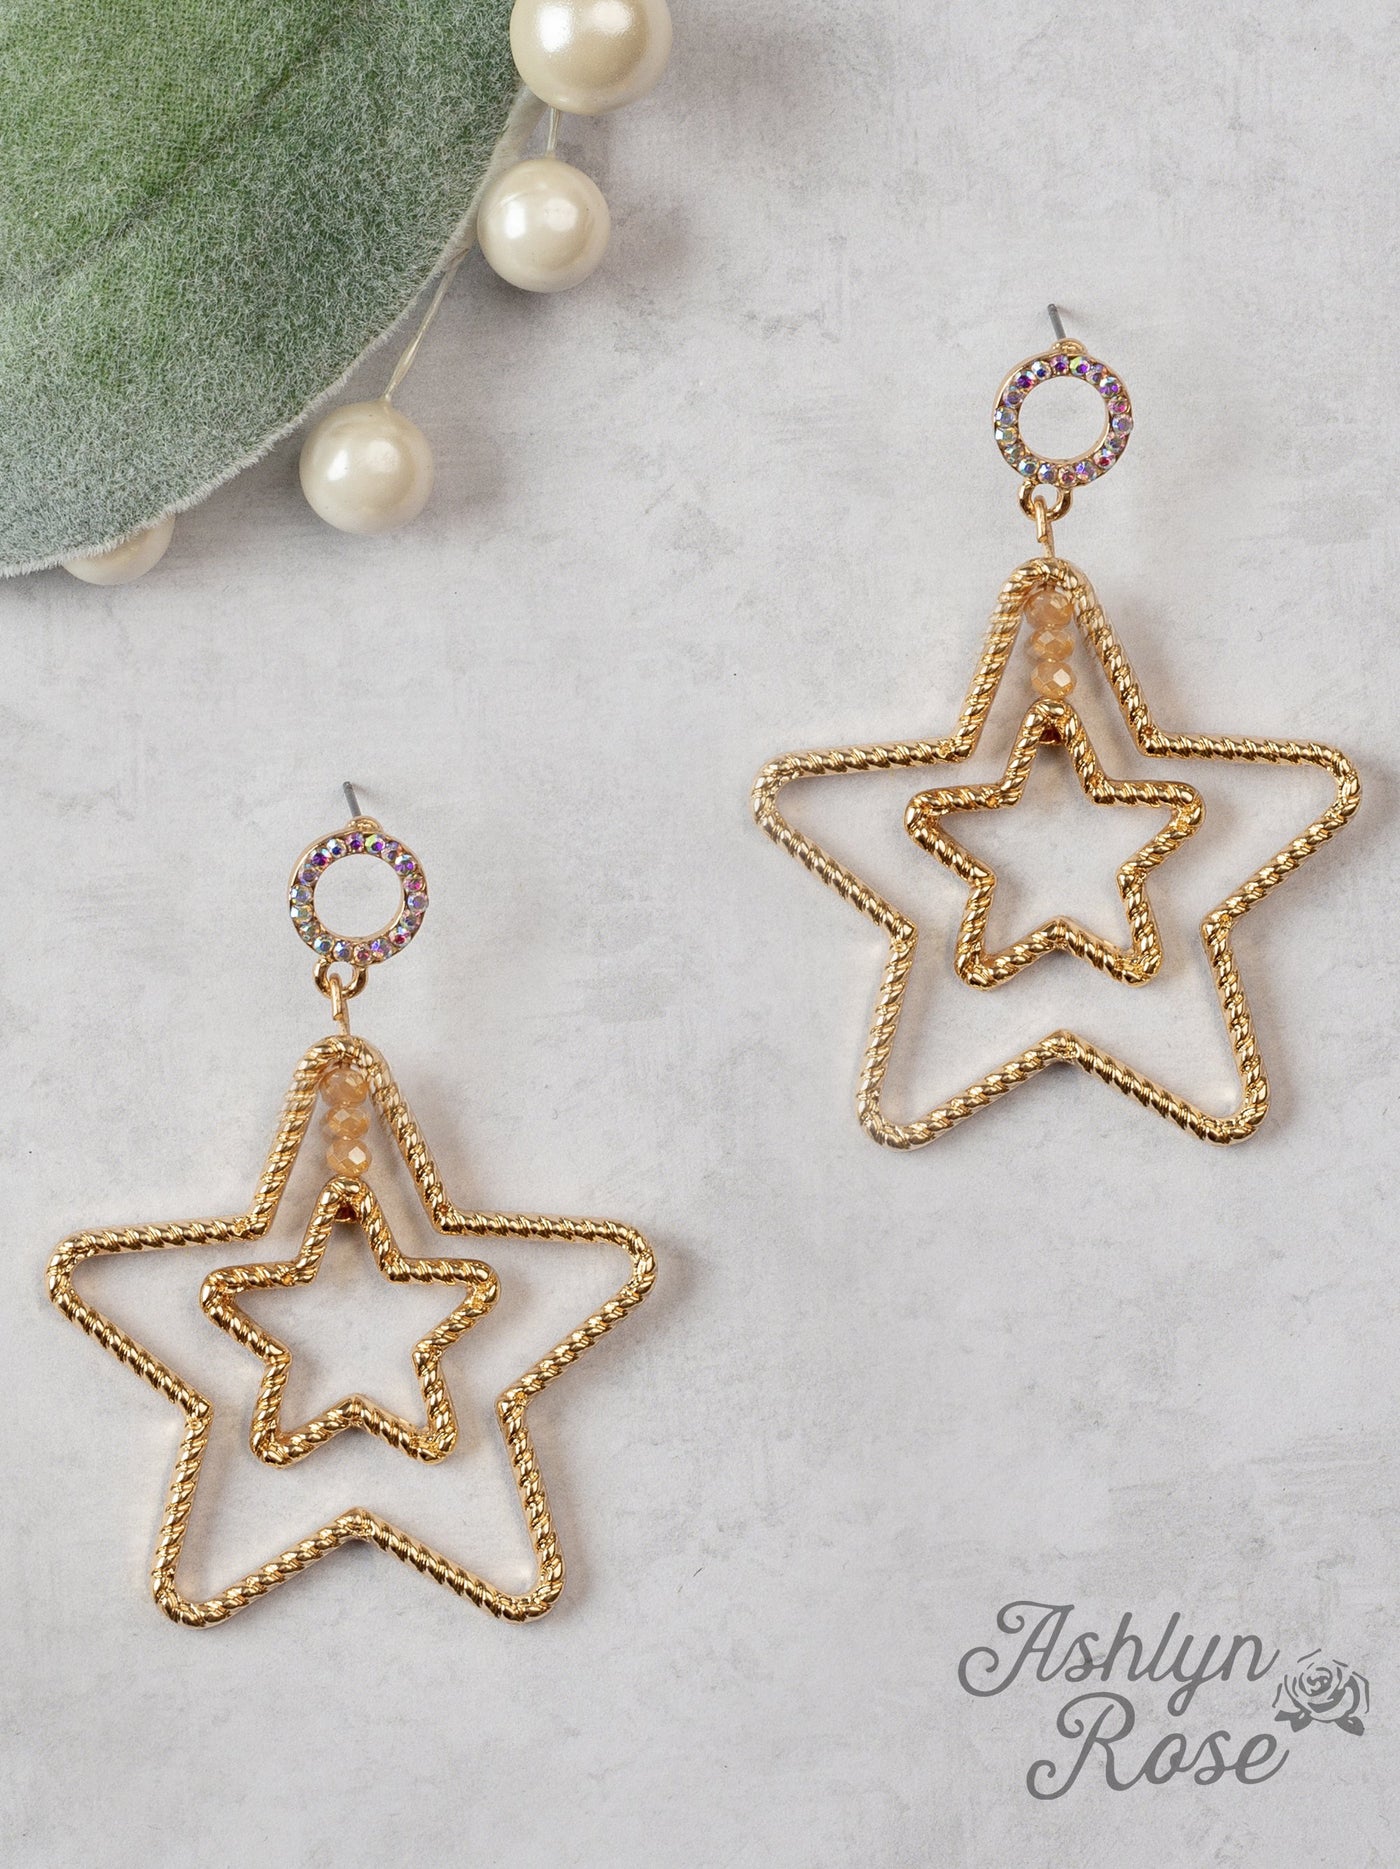 She's The Star Of The Show Gold Star Earrings